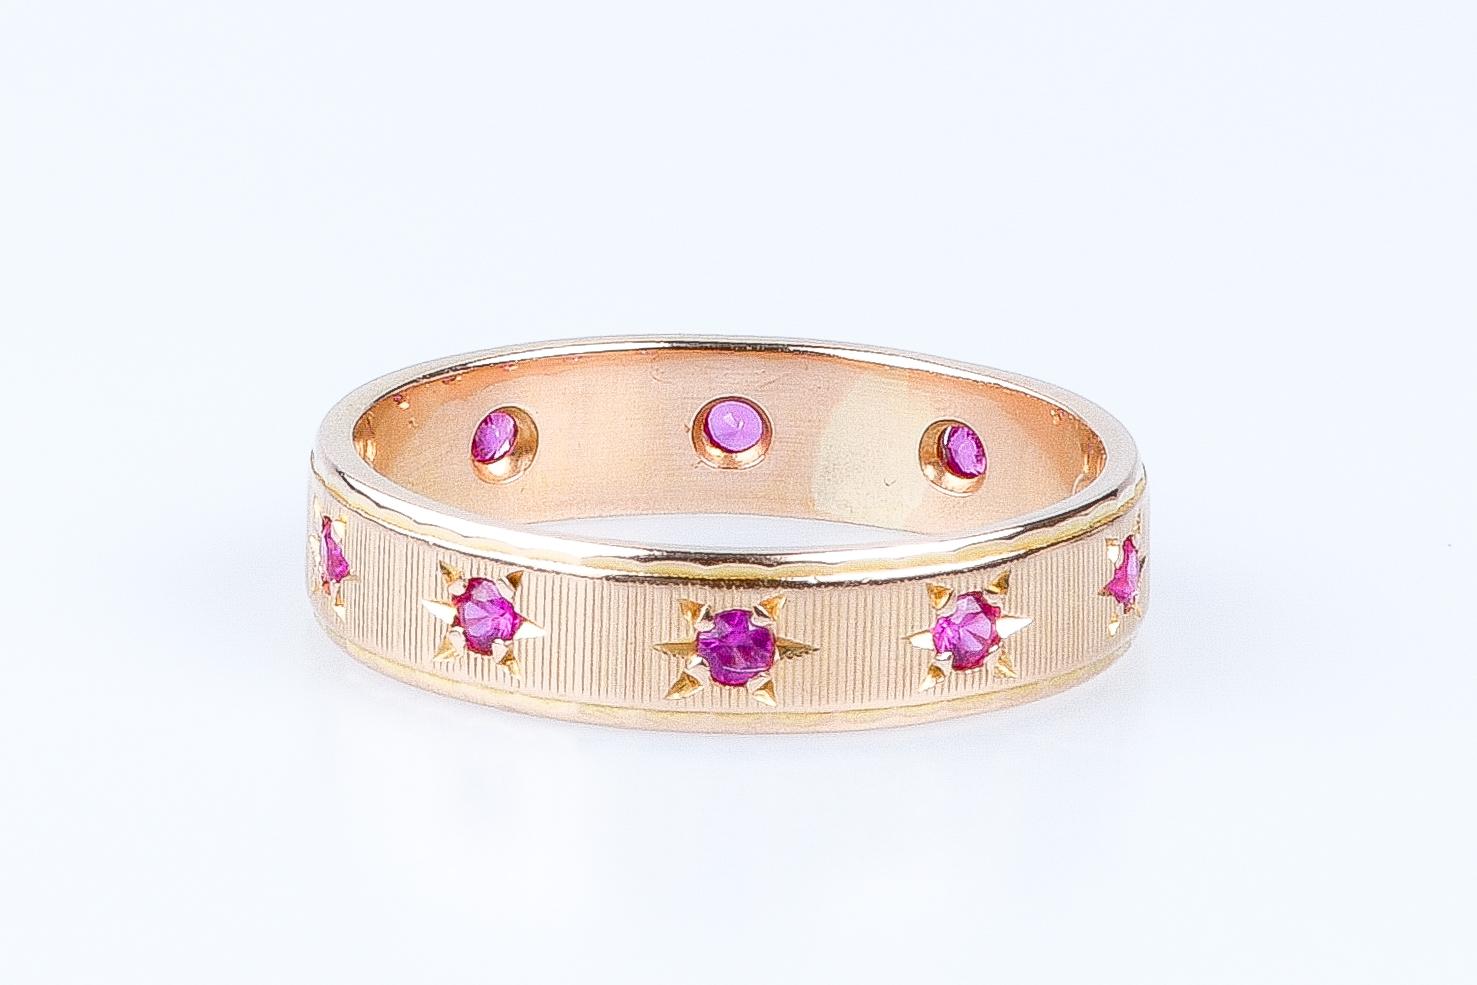 Women's 18 carat yellow gold alliance designed with 10 round rubies weighing 0.20 carat